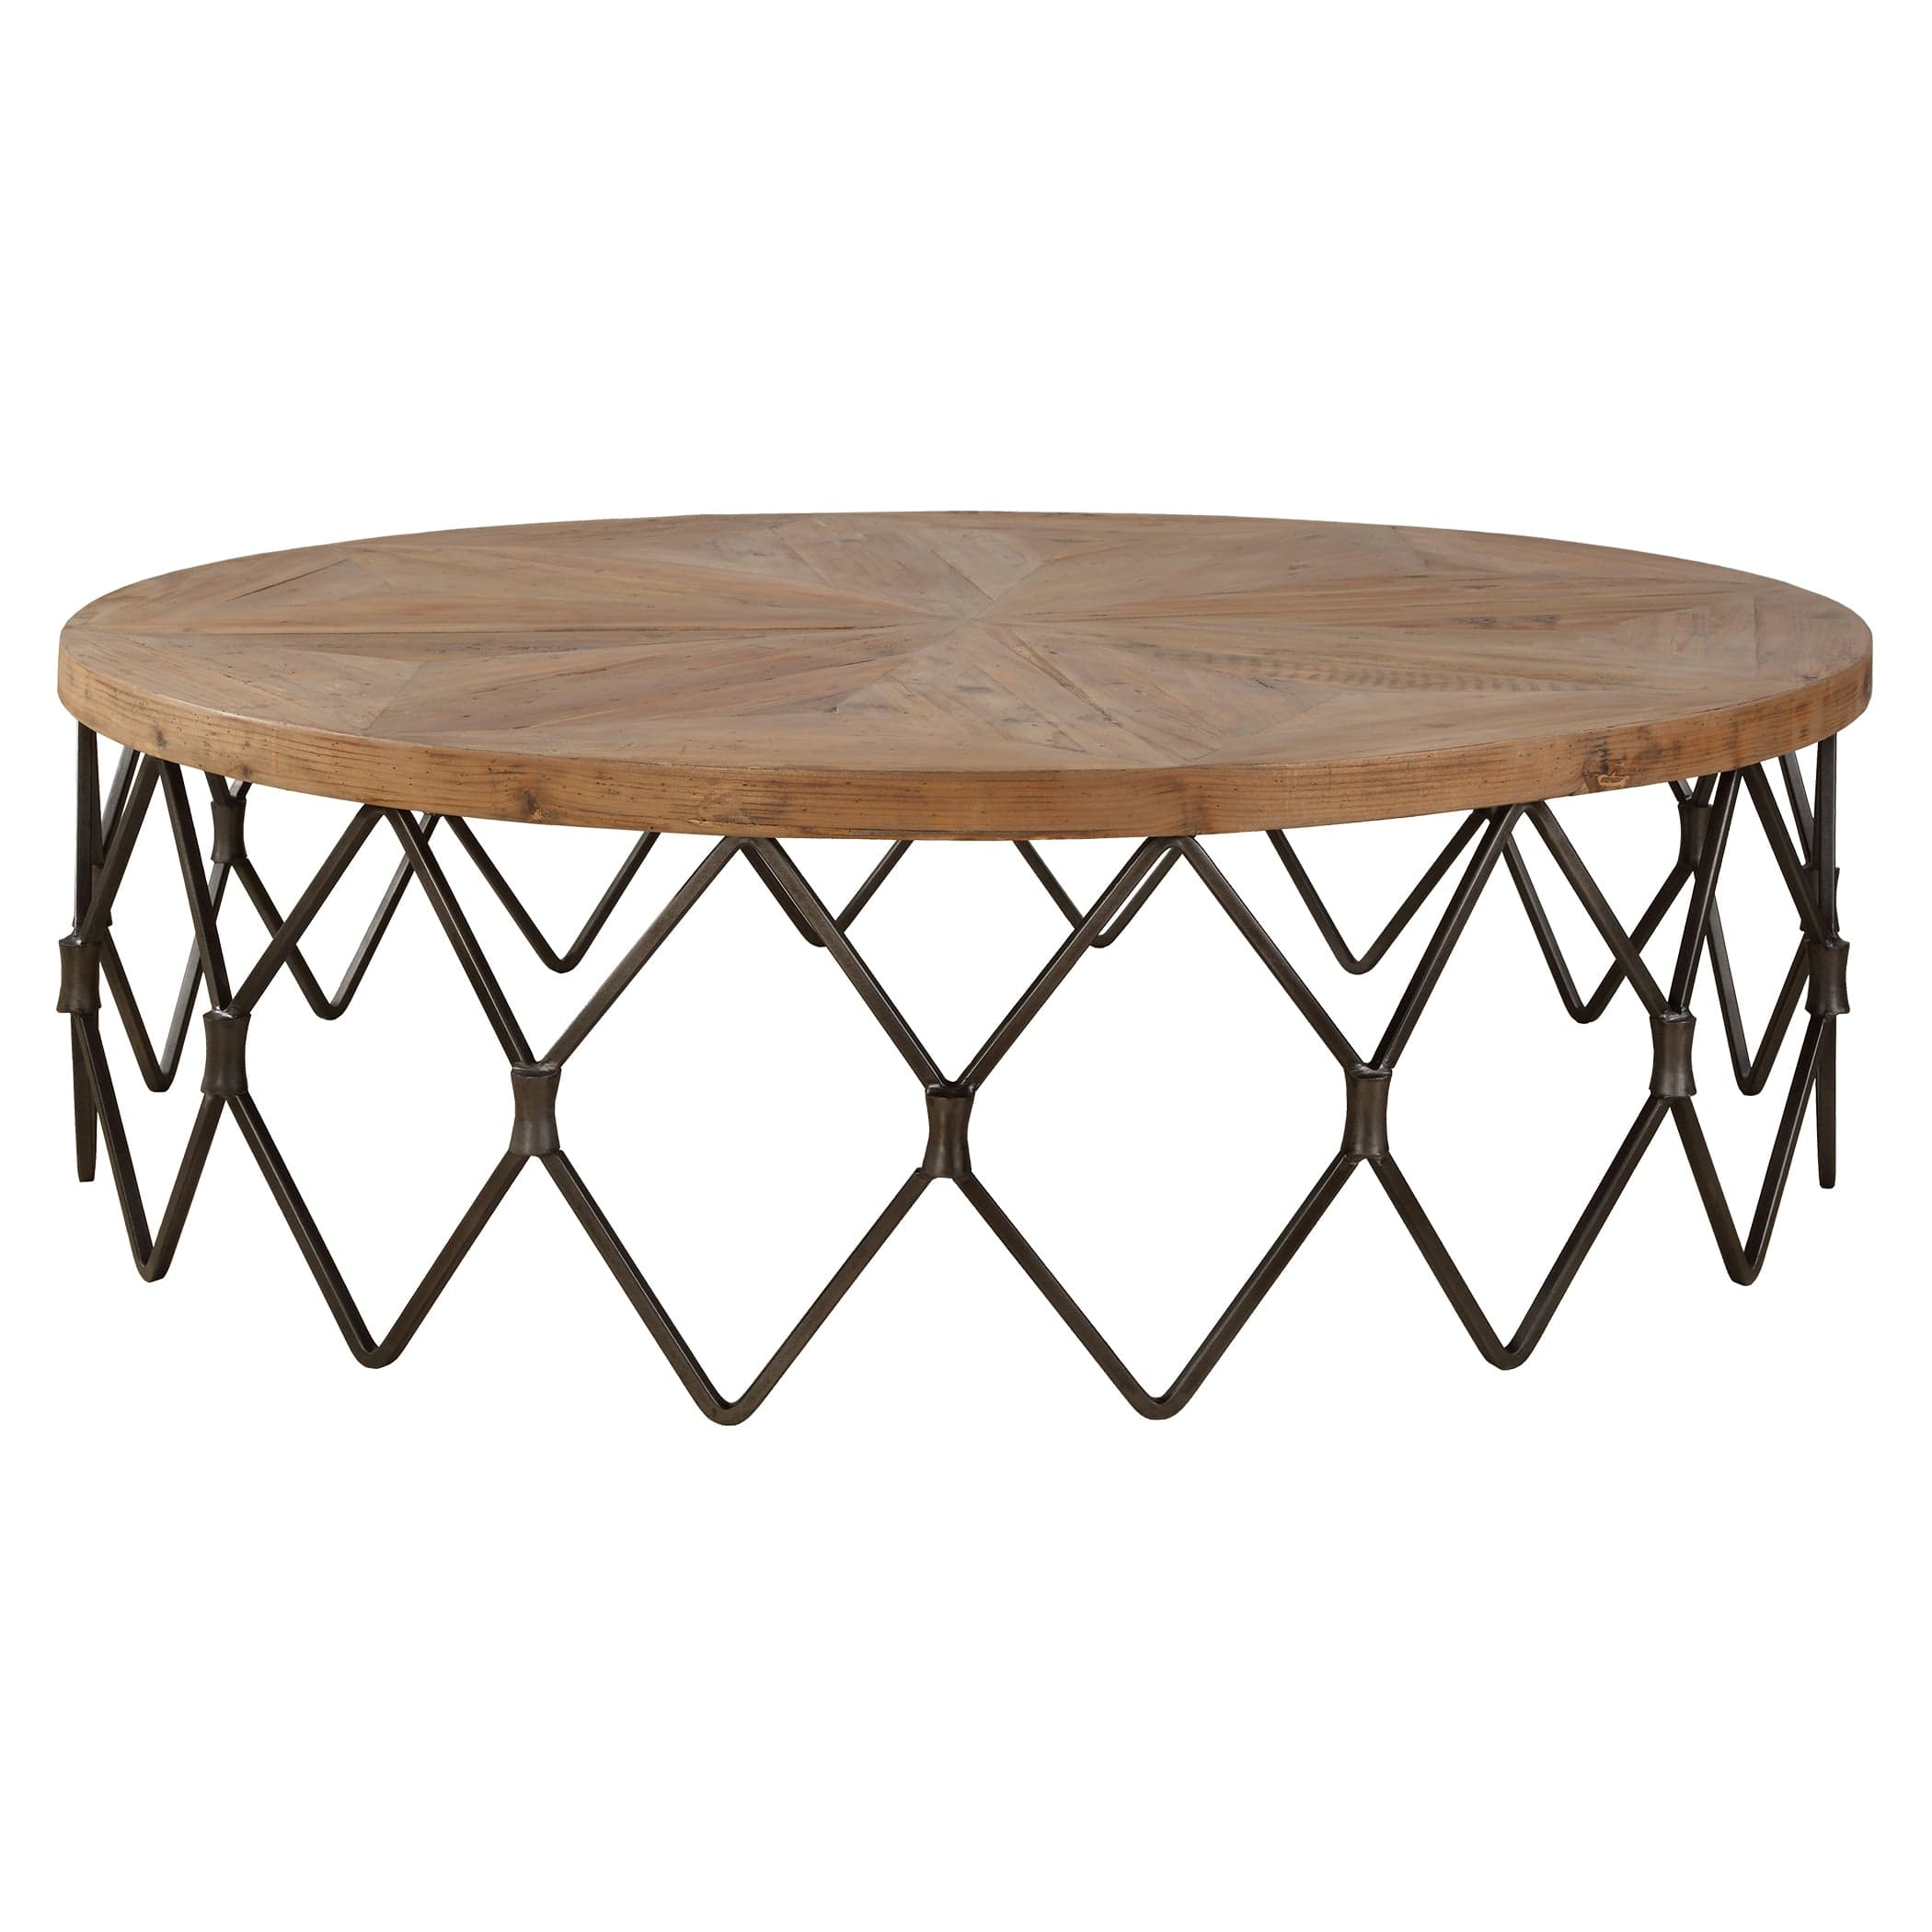 Chain Reaction Wooden Coffee Table Uttermost